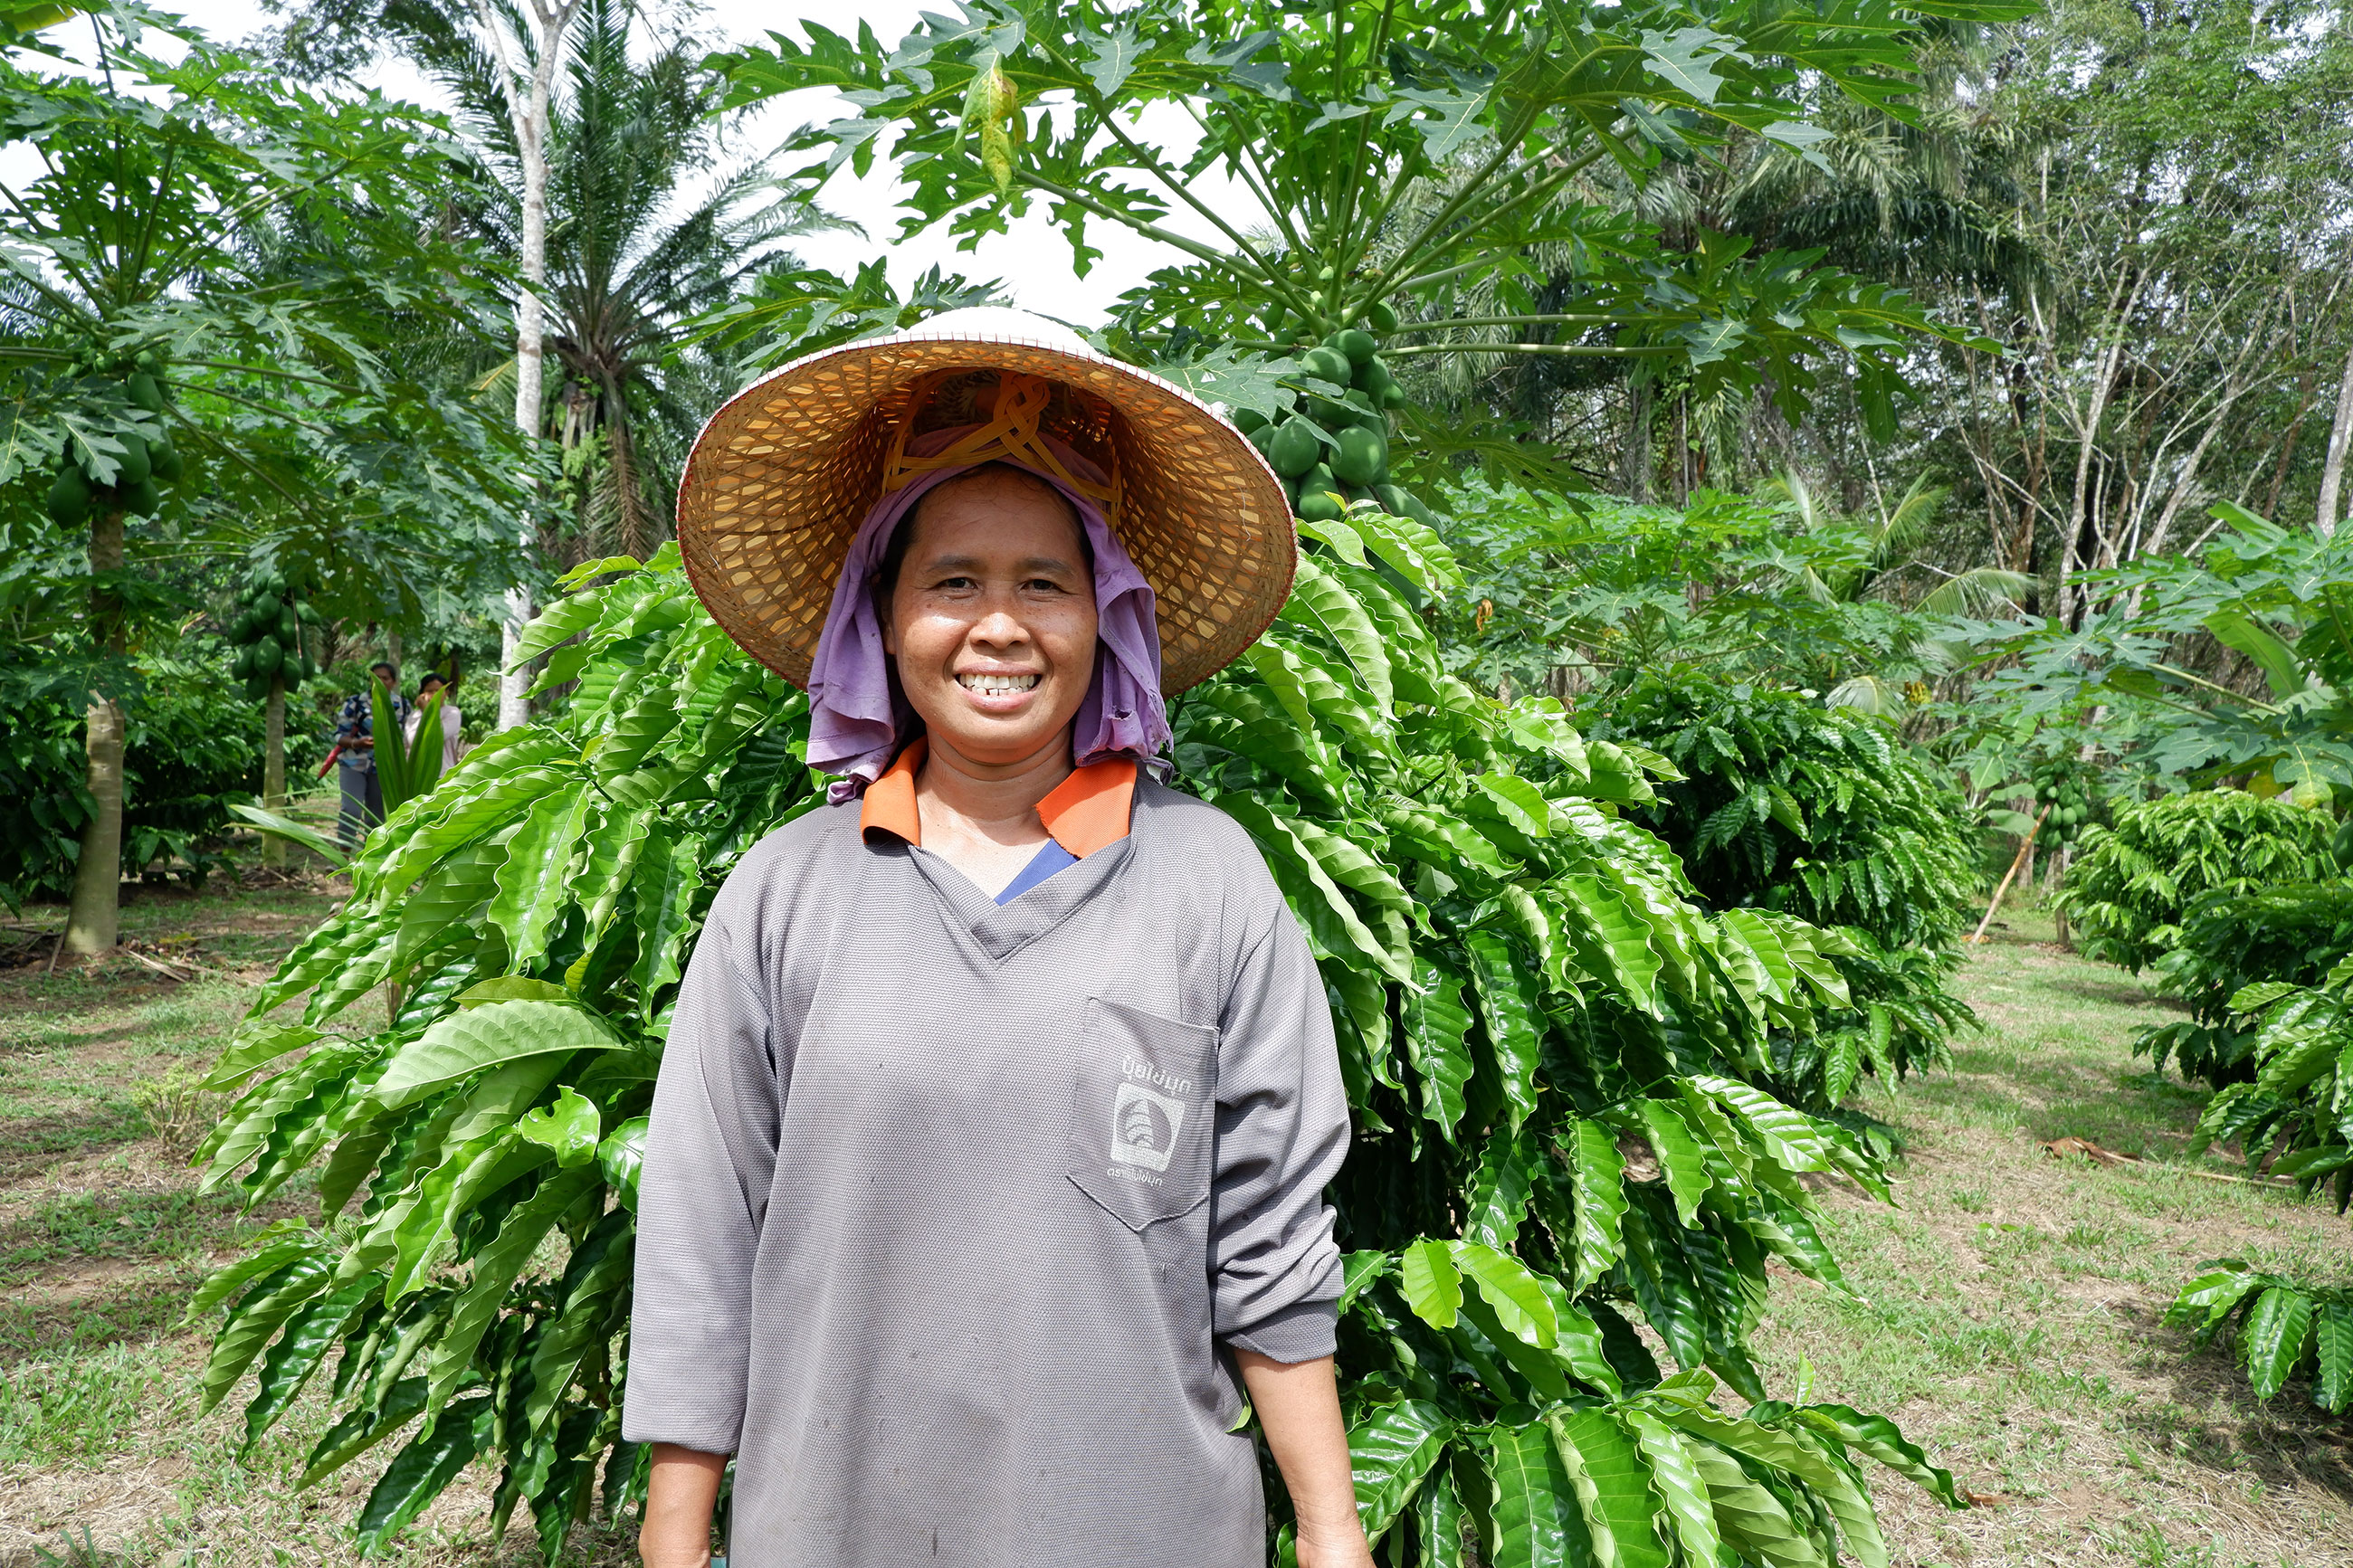 Ms. Kan Raksanit is the owner of the demonstration plot, which features a combination of more than 11 robusta coffee varieties and uses the integrated farming system. Her plot located in Chai Rat, Bang Saphan Noi District, Prachuap Khiri Khan province.